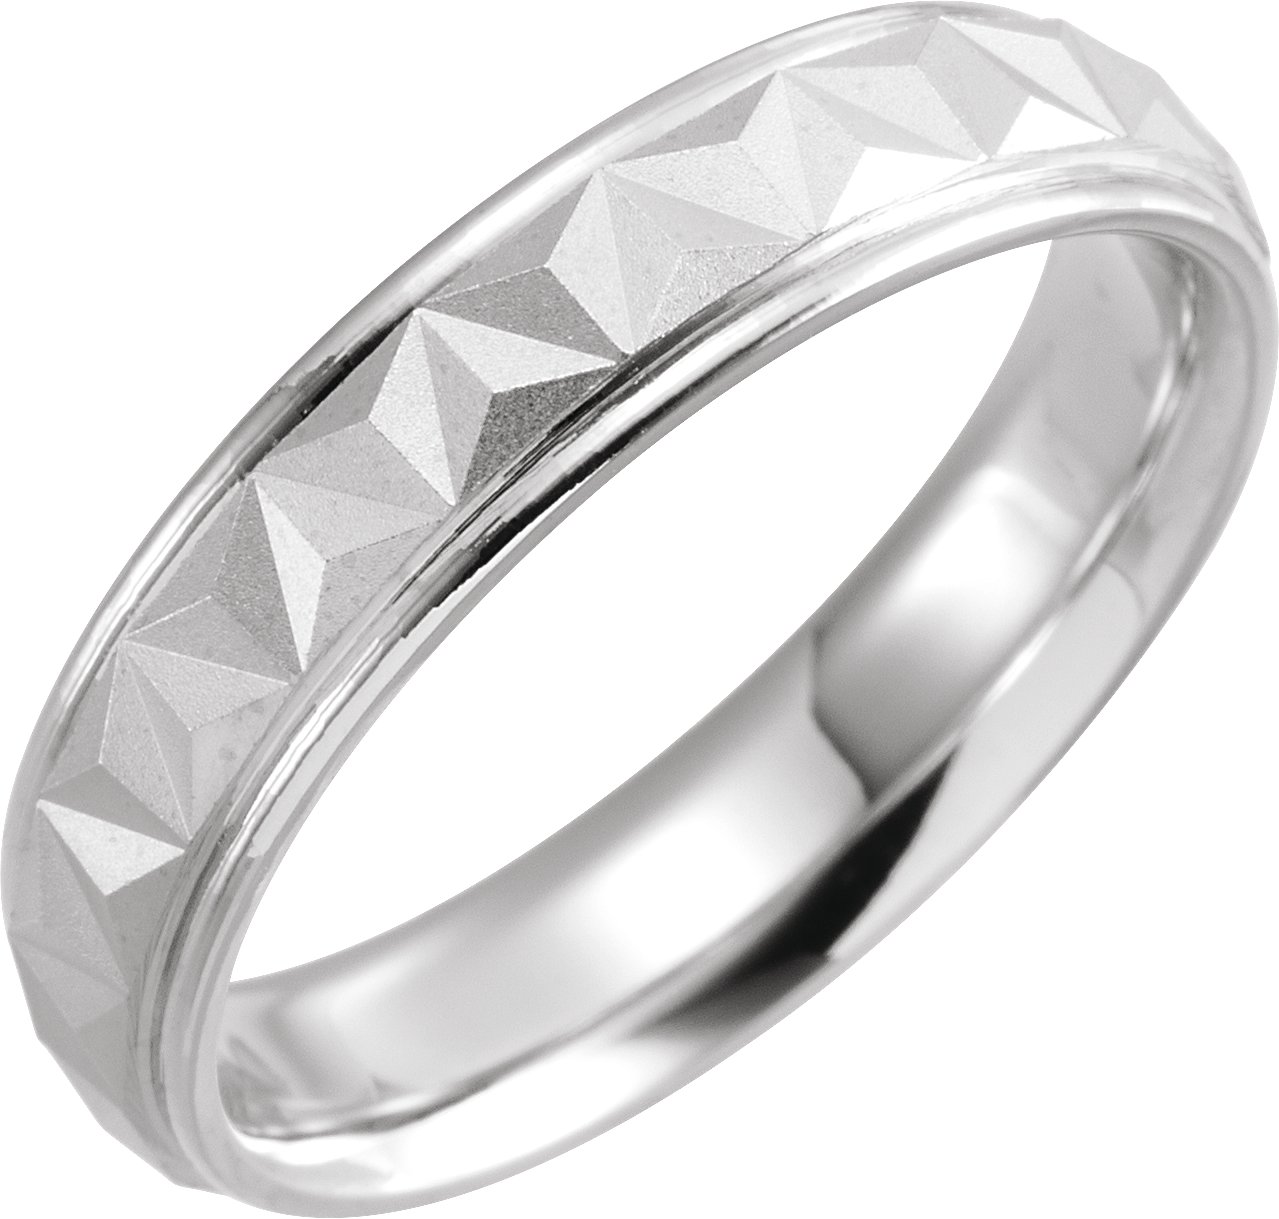 Sterling Silver 5 mm Geometric Band with Matte/Polished Finish Size 20